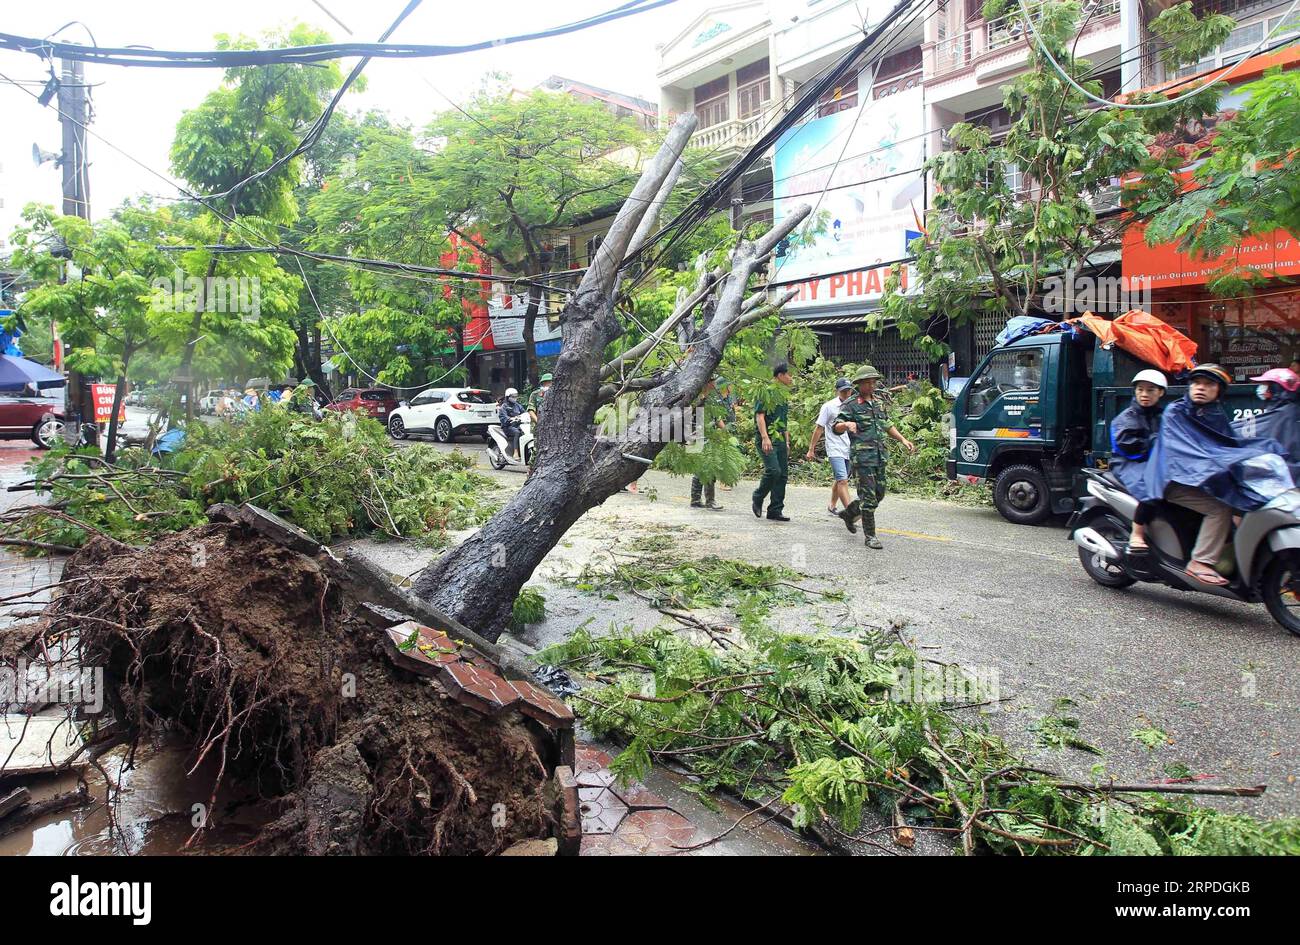 (190803) -- HANOI, Aug. 3, 2019 (Xinhua) -- A tree is uprooted due to heavy rains and whirlwinds sparked by Typhoon Wipha in Hai Phong city, Vietnam, on Aug. 3, 2019. Typhoon Wipha, the third tropical storm to strike Vietnam so far this year, has killed one people and left 15 others missing, Vietnam News Agency reported on Saturday. (Xinhua/VNA) VIETNAM-TYPHOON WIPHA-AFTERMATH PUBLICATIONxNOTxINxCHN Stock Photo